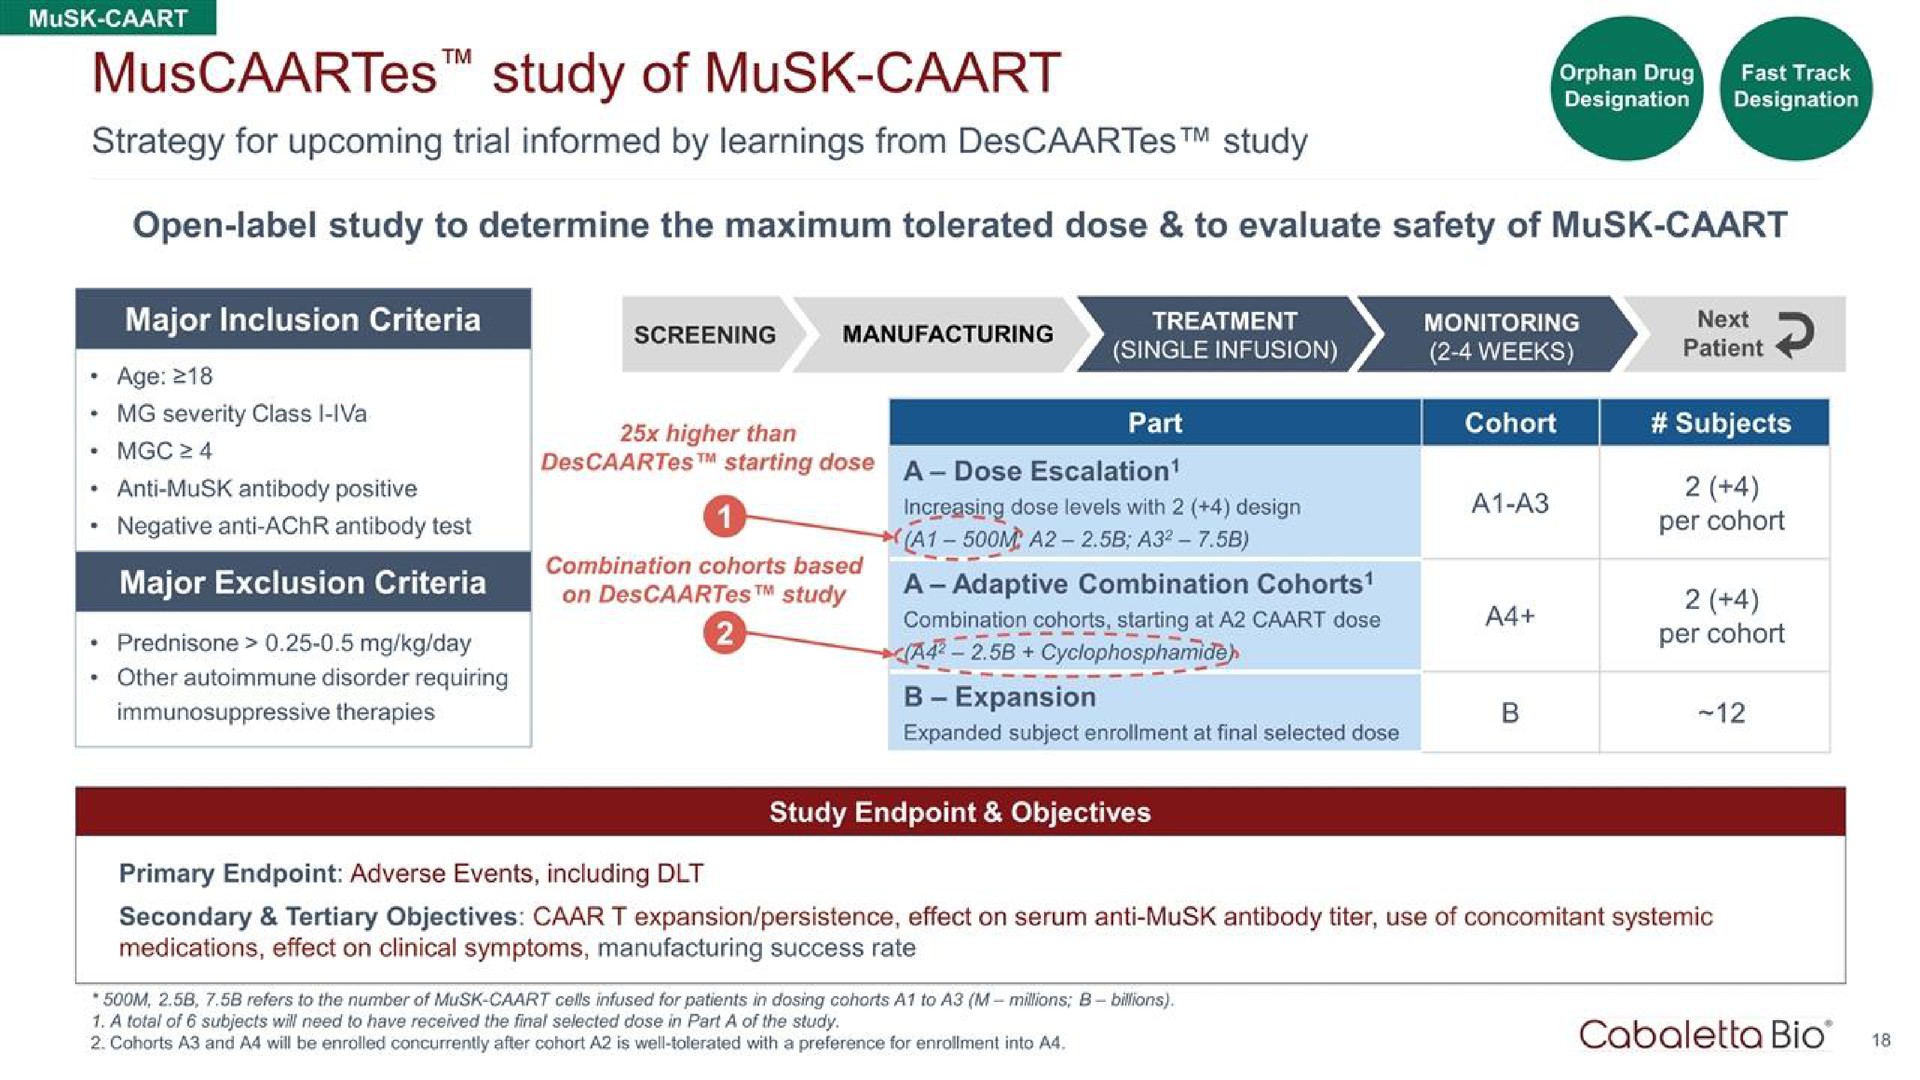 study of musk orphan drug fast track screening manufacturing sare patient | Cabaletta Bio